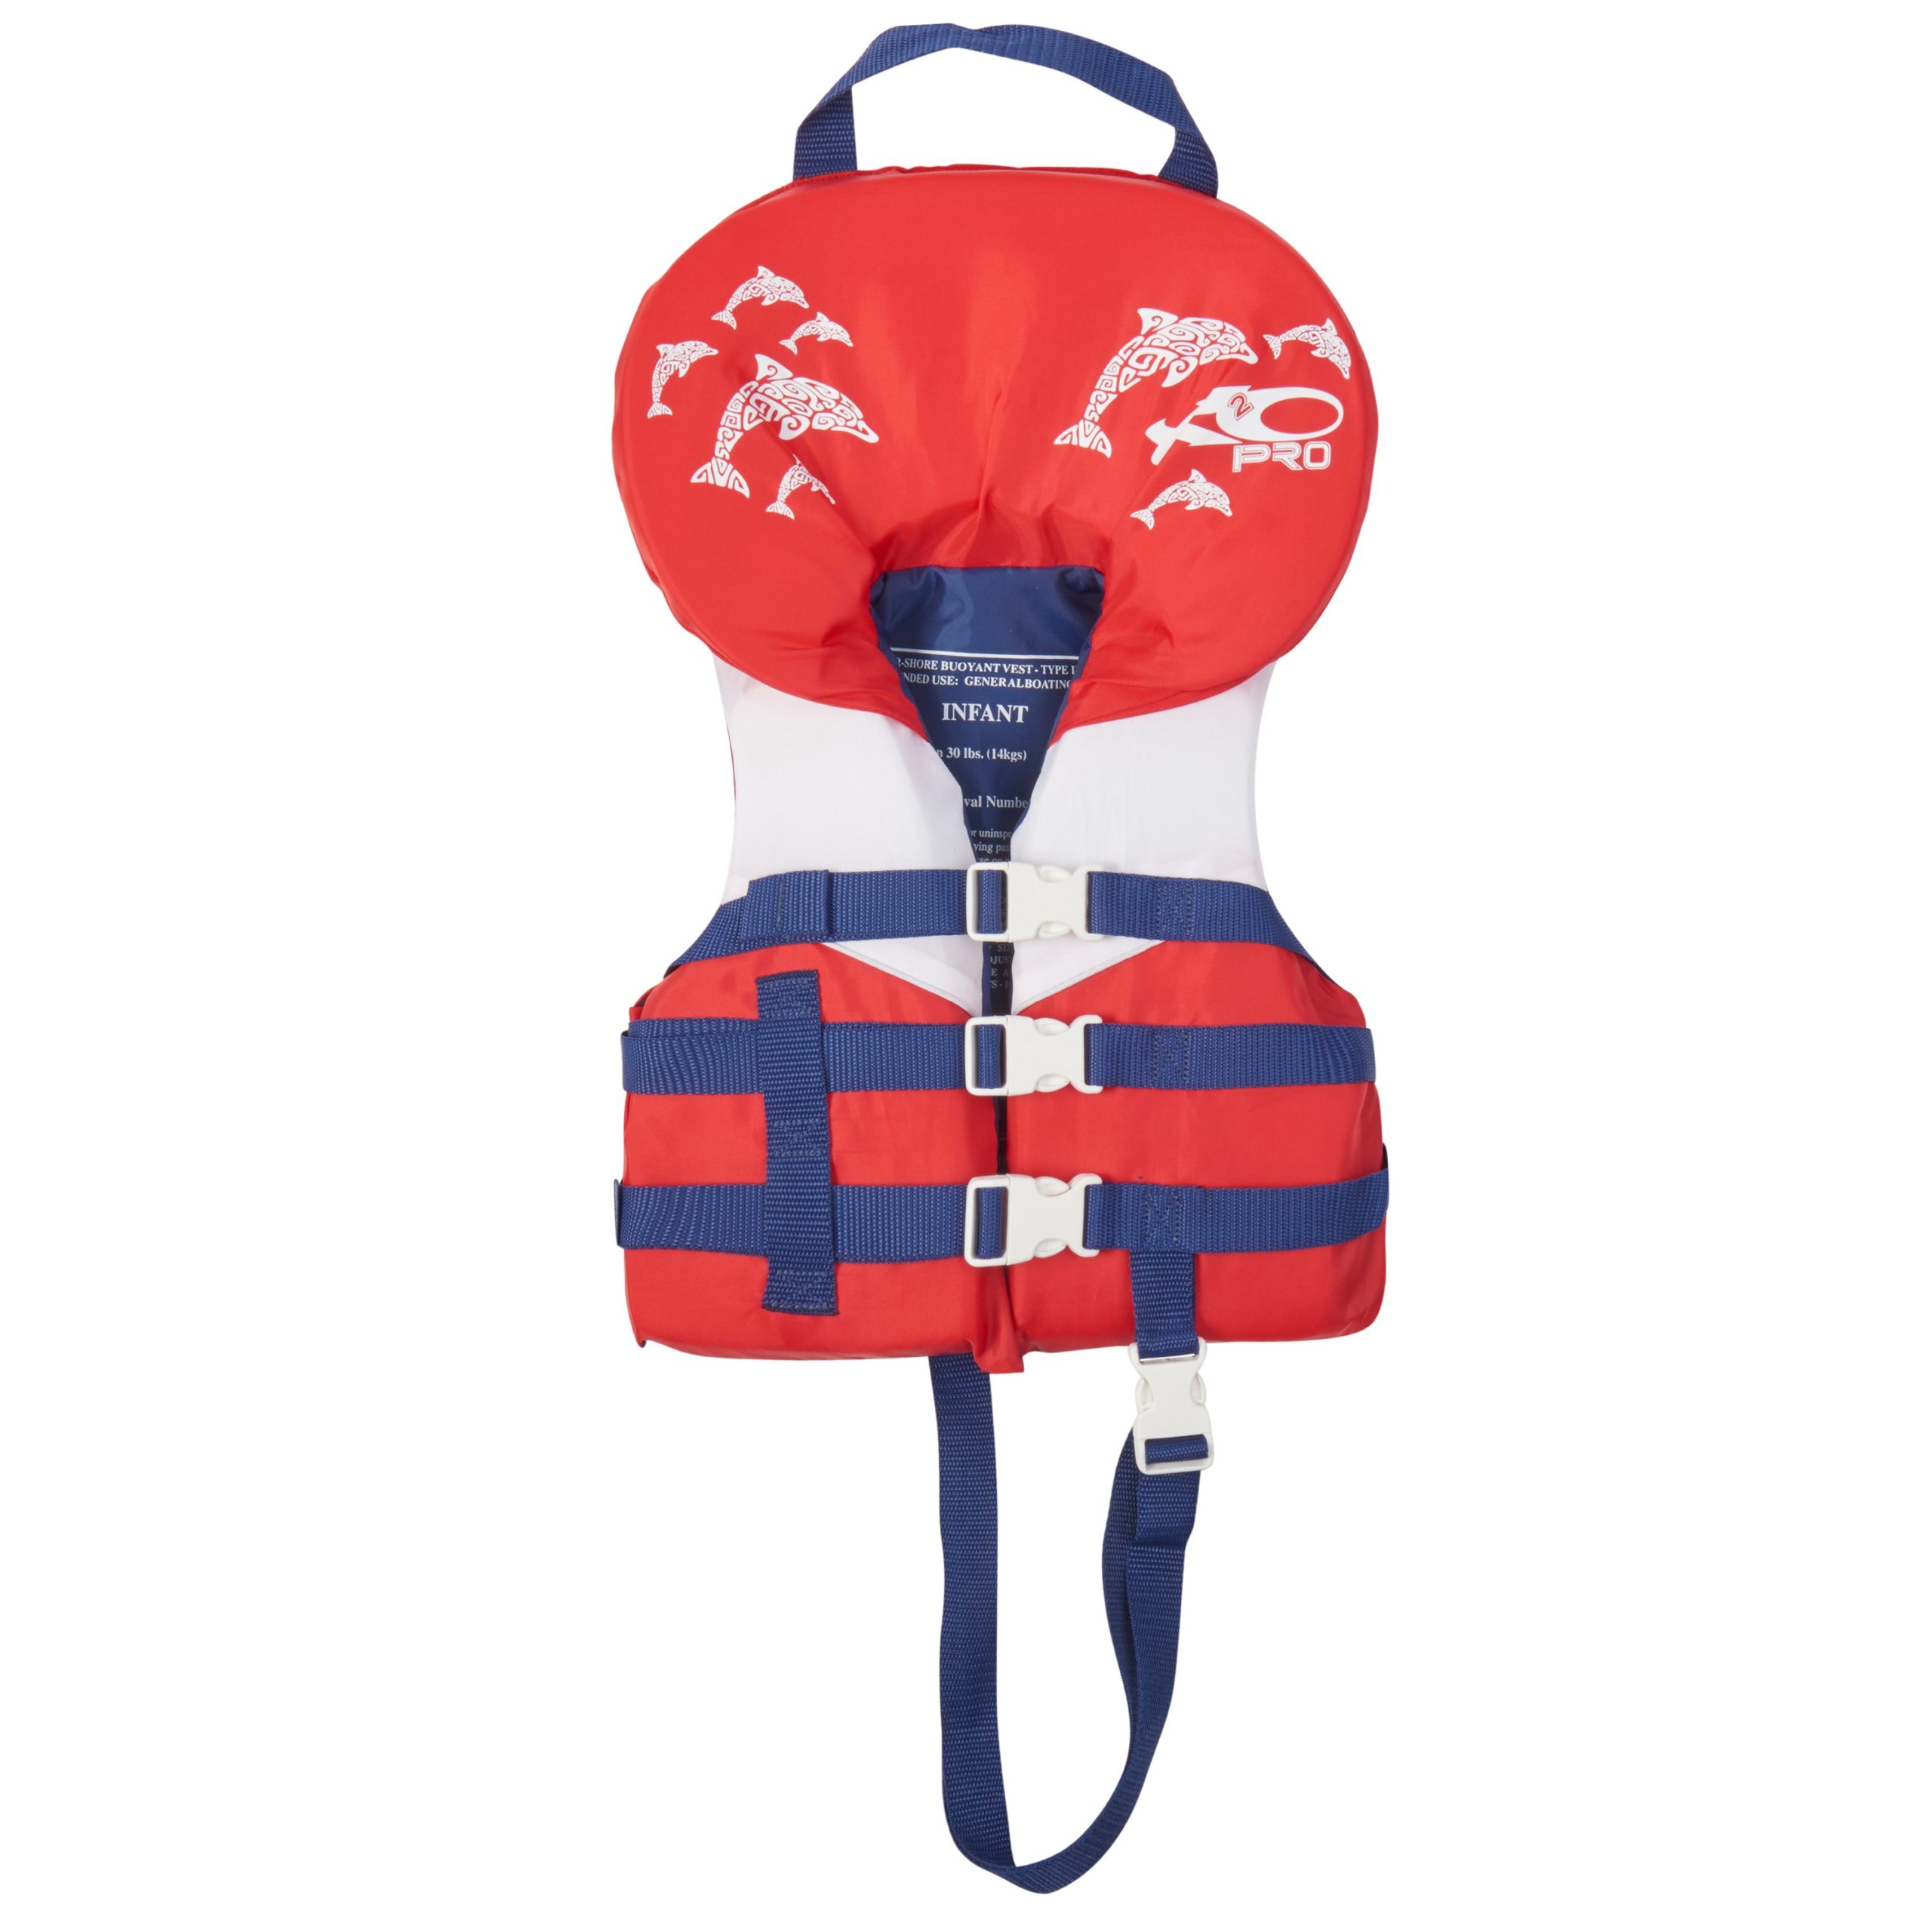 Minnie Mouse Child Closed Sided Life Vest by X20 at Fleet Farm